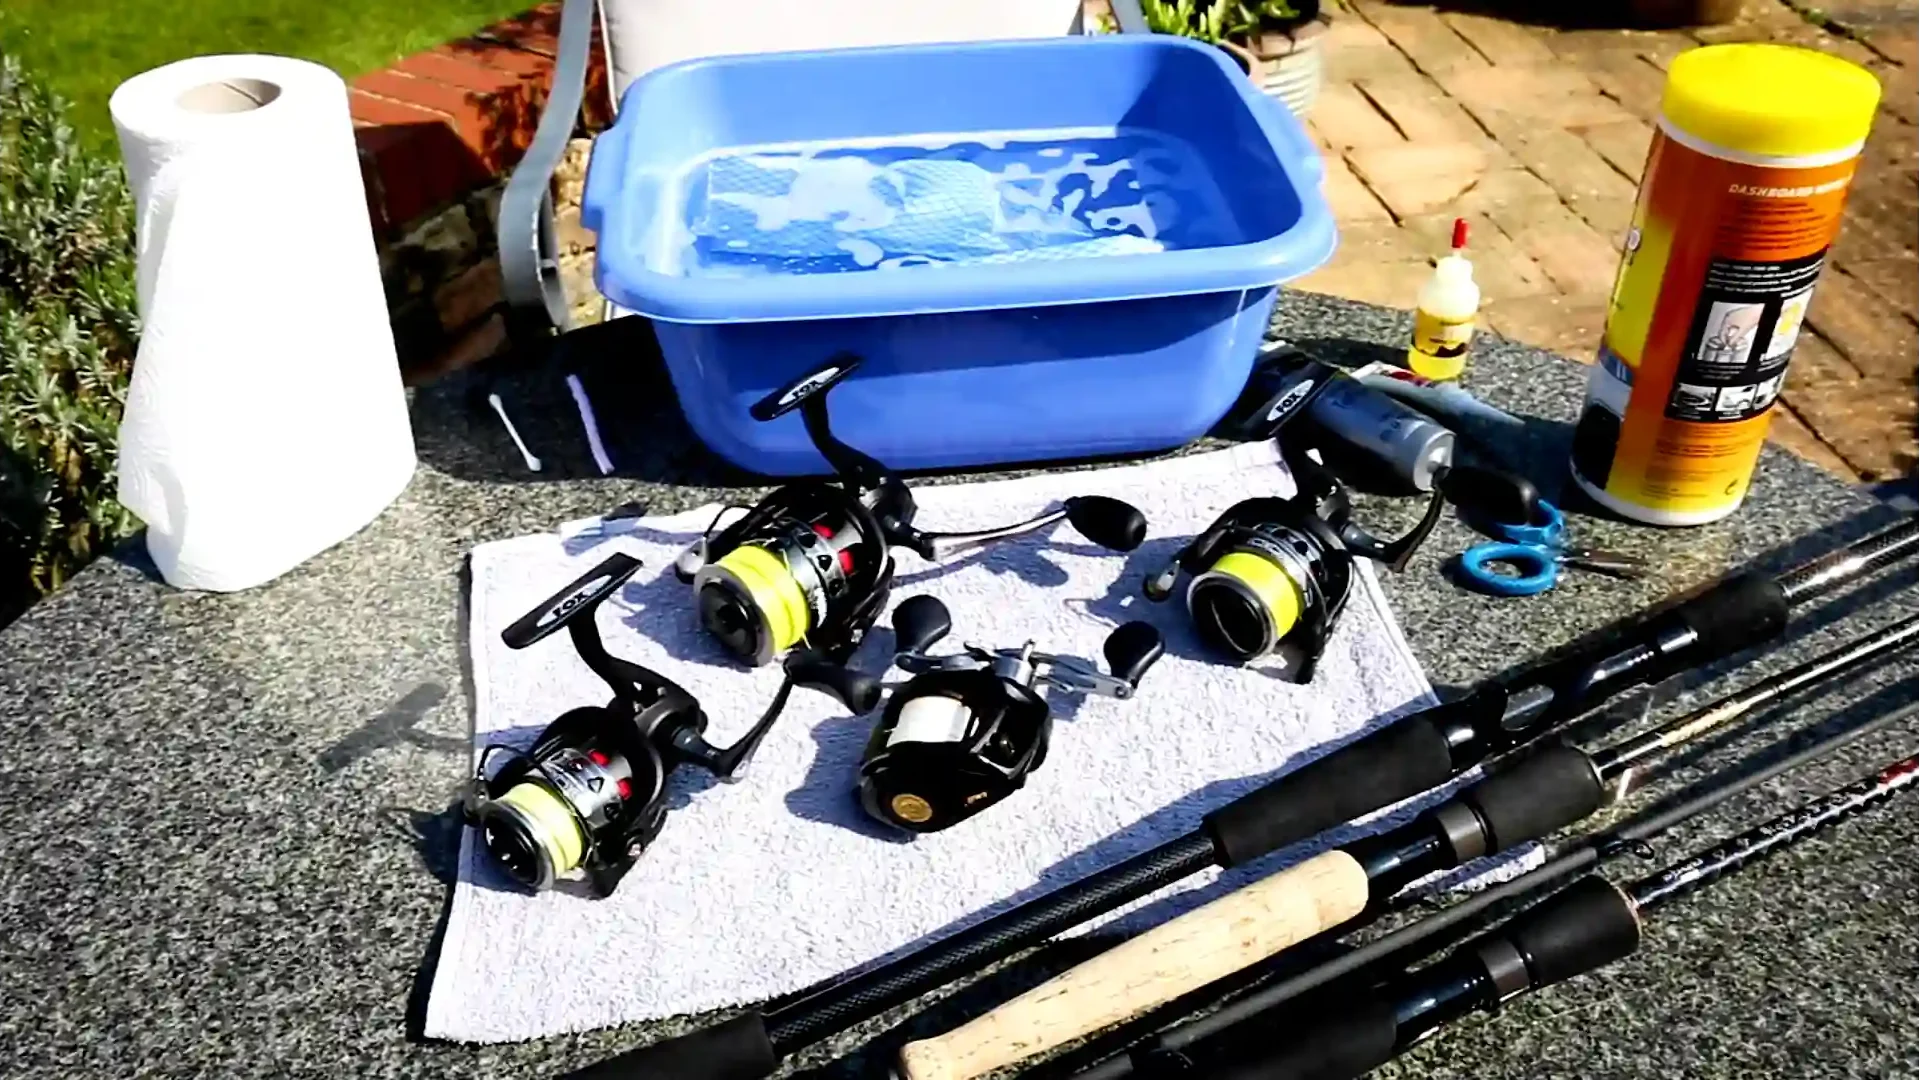 Rods, reels, clean cloth, small tub and water, tissue roll